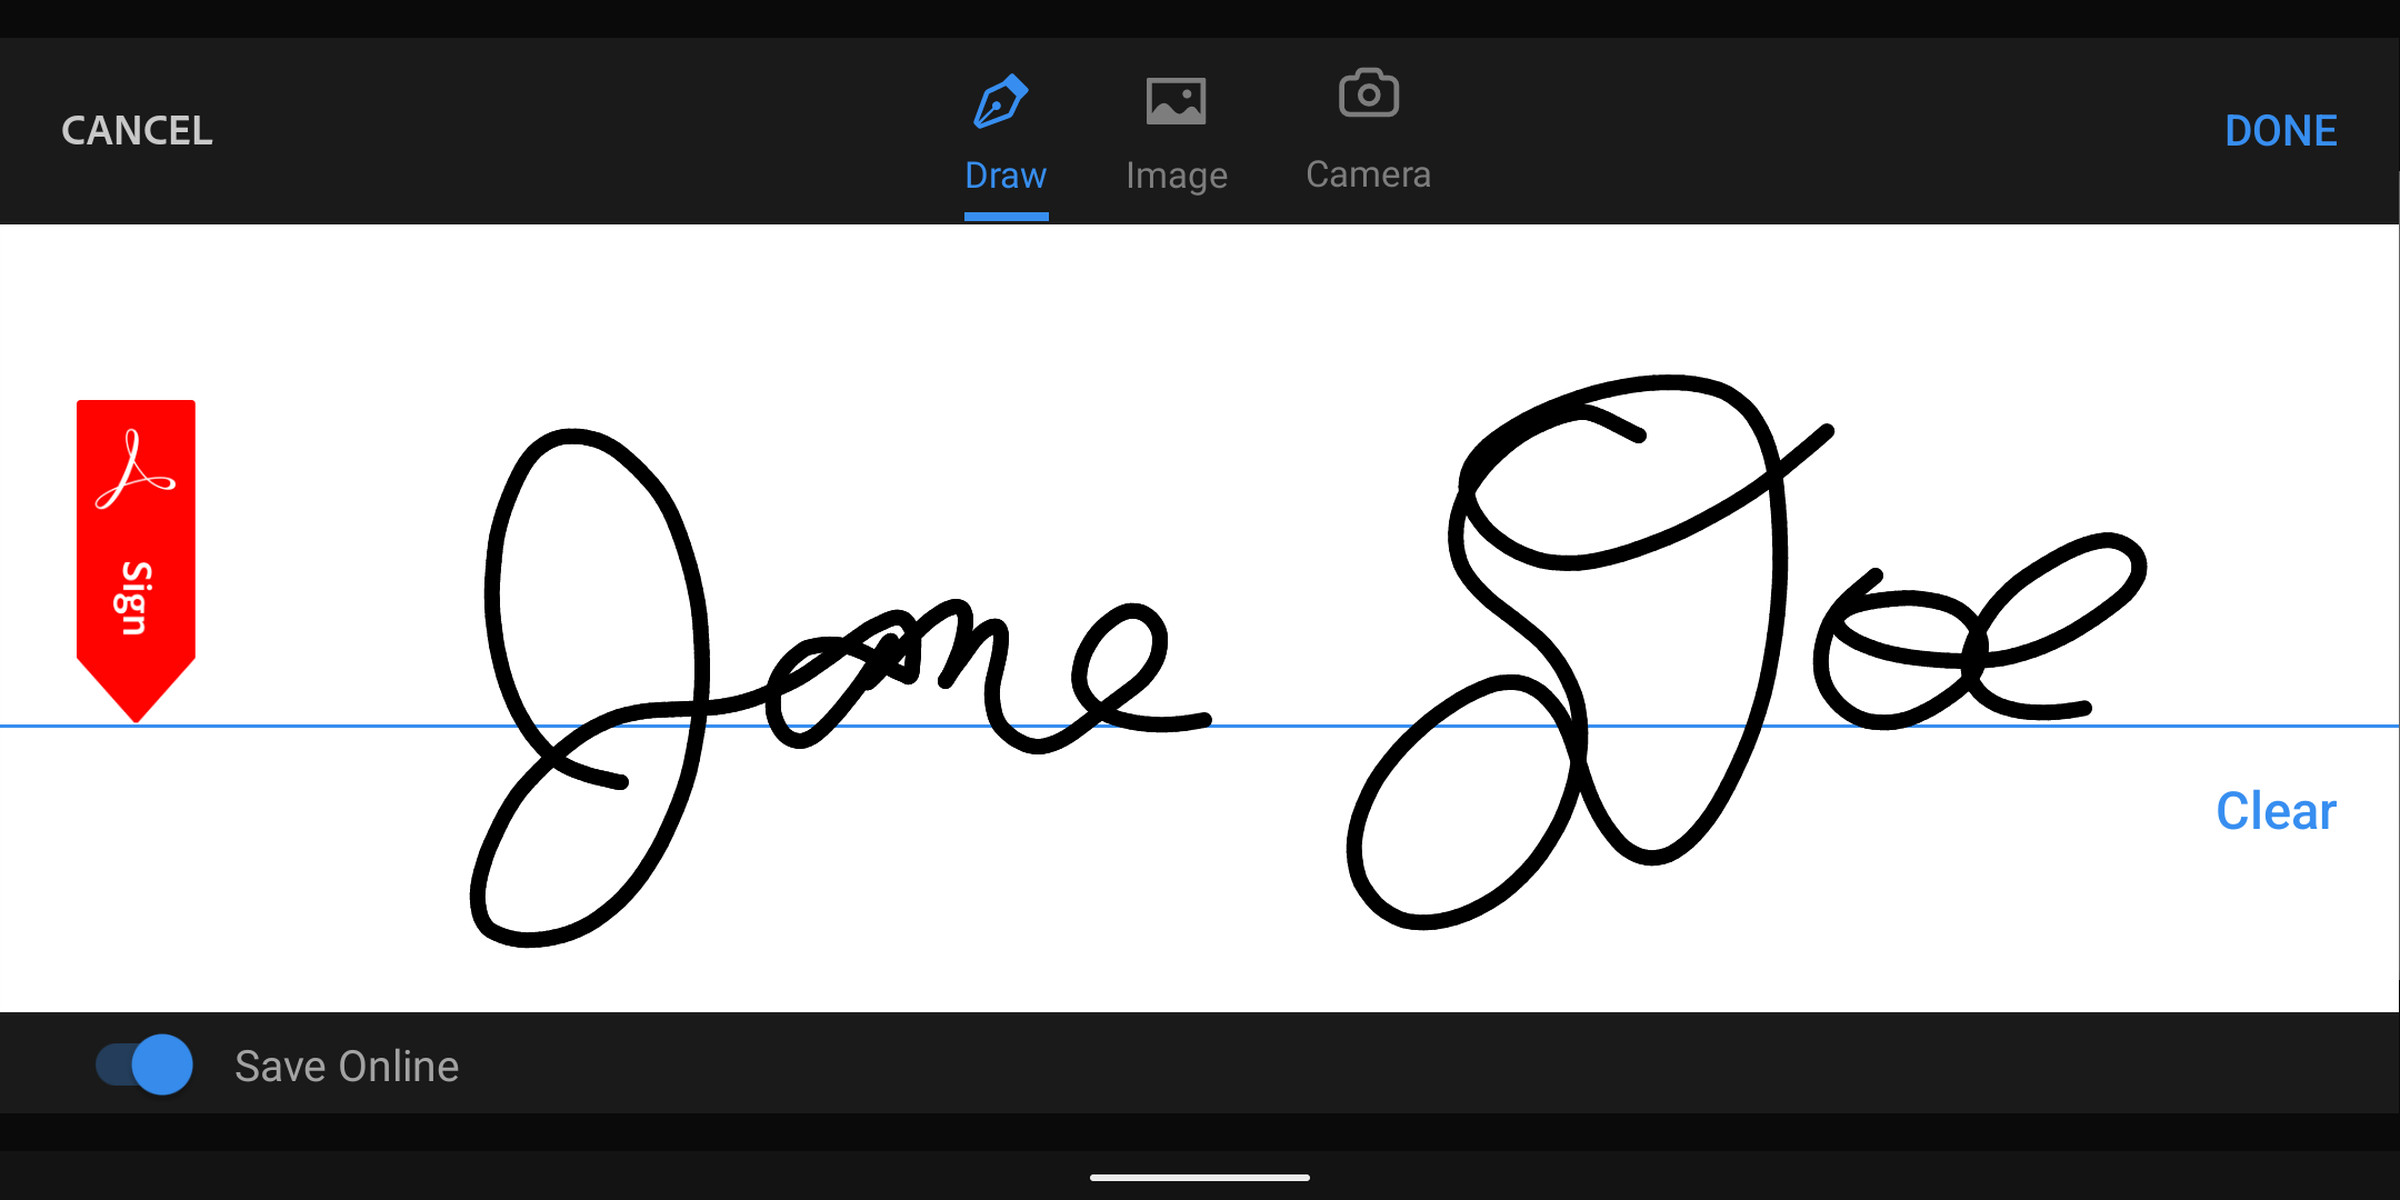 You can draw your signature on the screen, use an existing image, or take a photo.